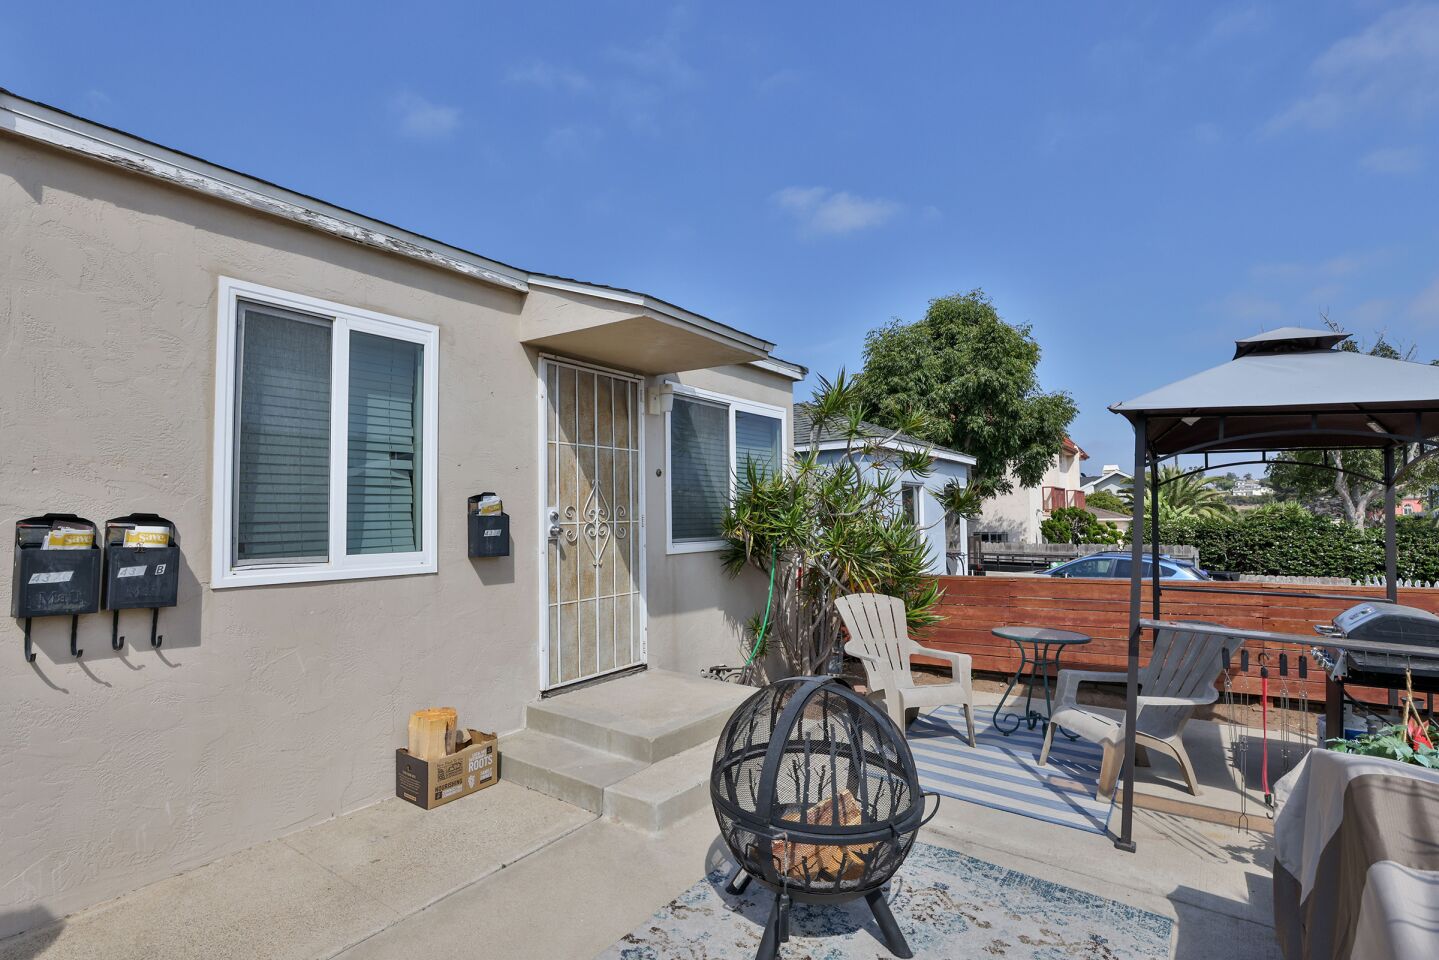 4374 Montalvo StreetOcean Beach$1,195,000This well-maintained duplex plus extra unit consists of two 1-bedroom units, plus a bonus studio. Two of the units share a large patio, while the front unit has a private patio and ocean views.Catrina Russell619.226.BUYS (2897)DRE# 01229742